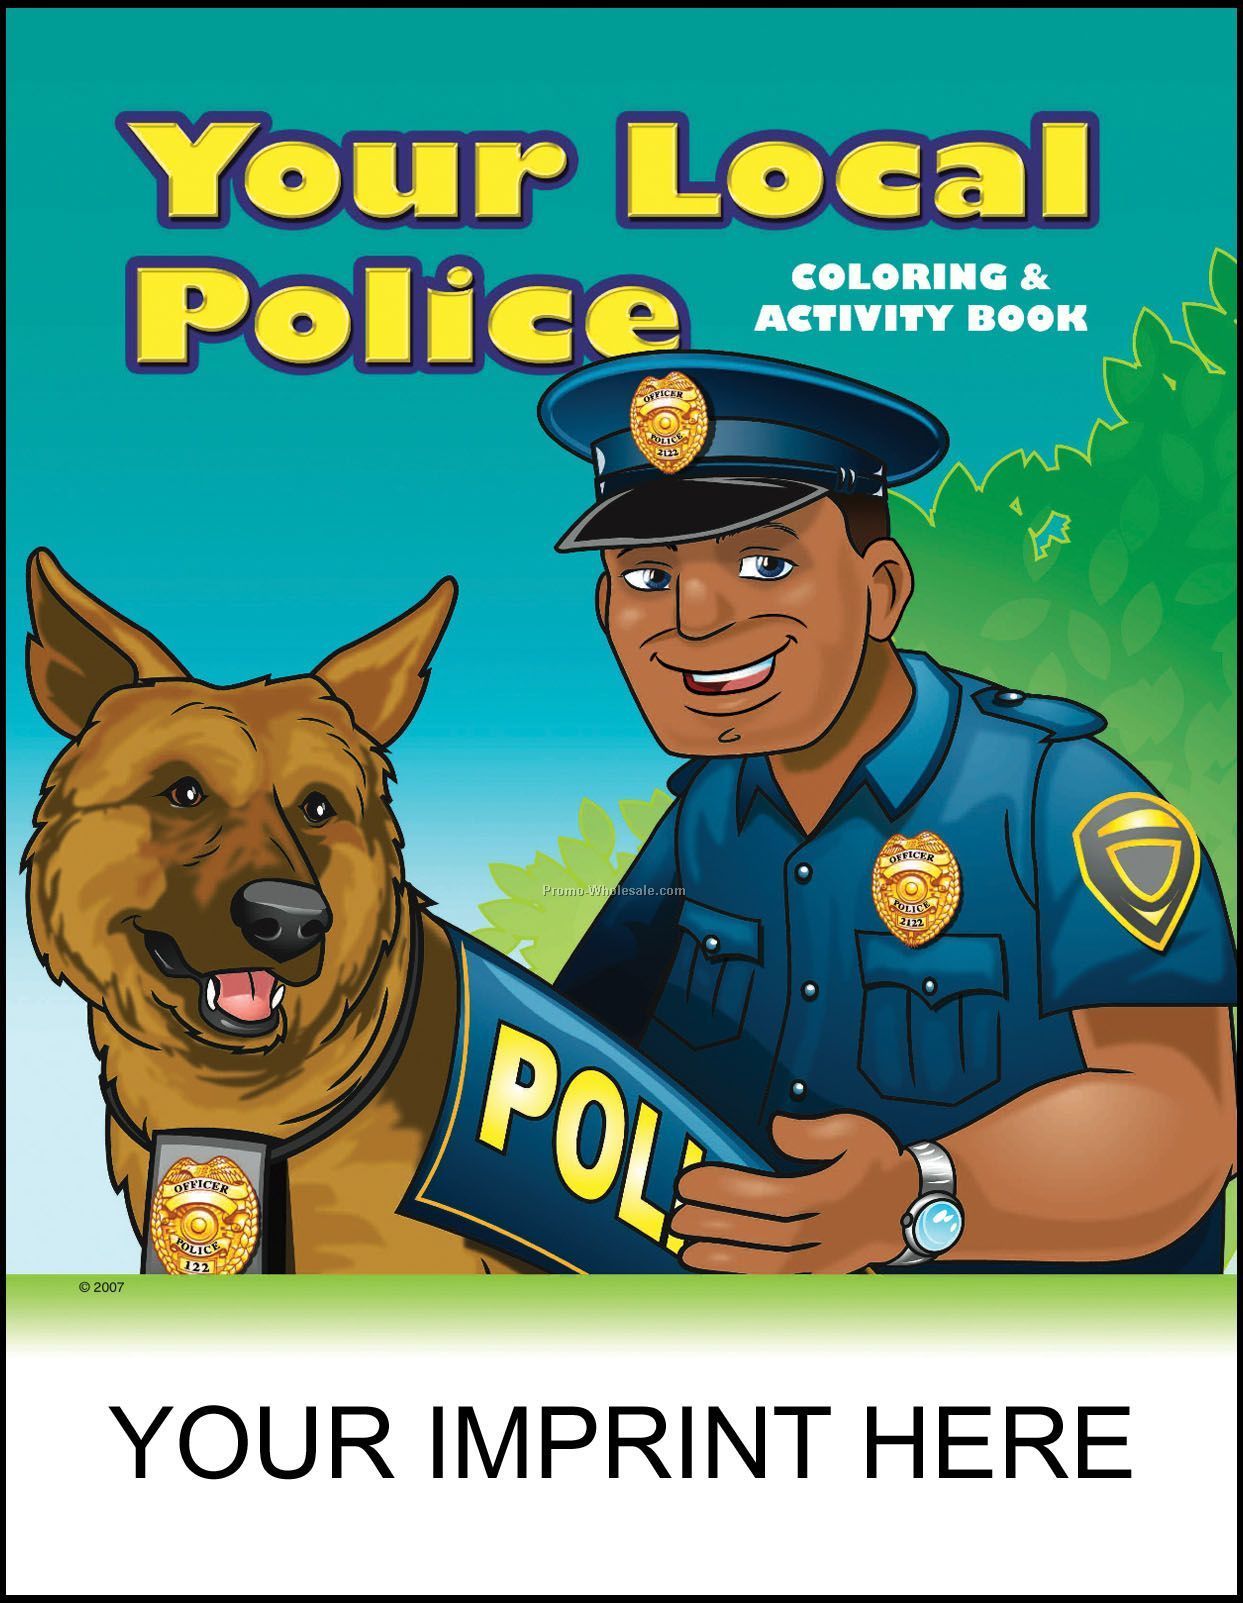 8-3/8"x10-7/8" Your Local Police Coloring & Activity Book